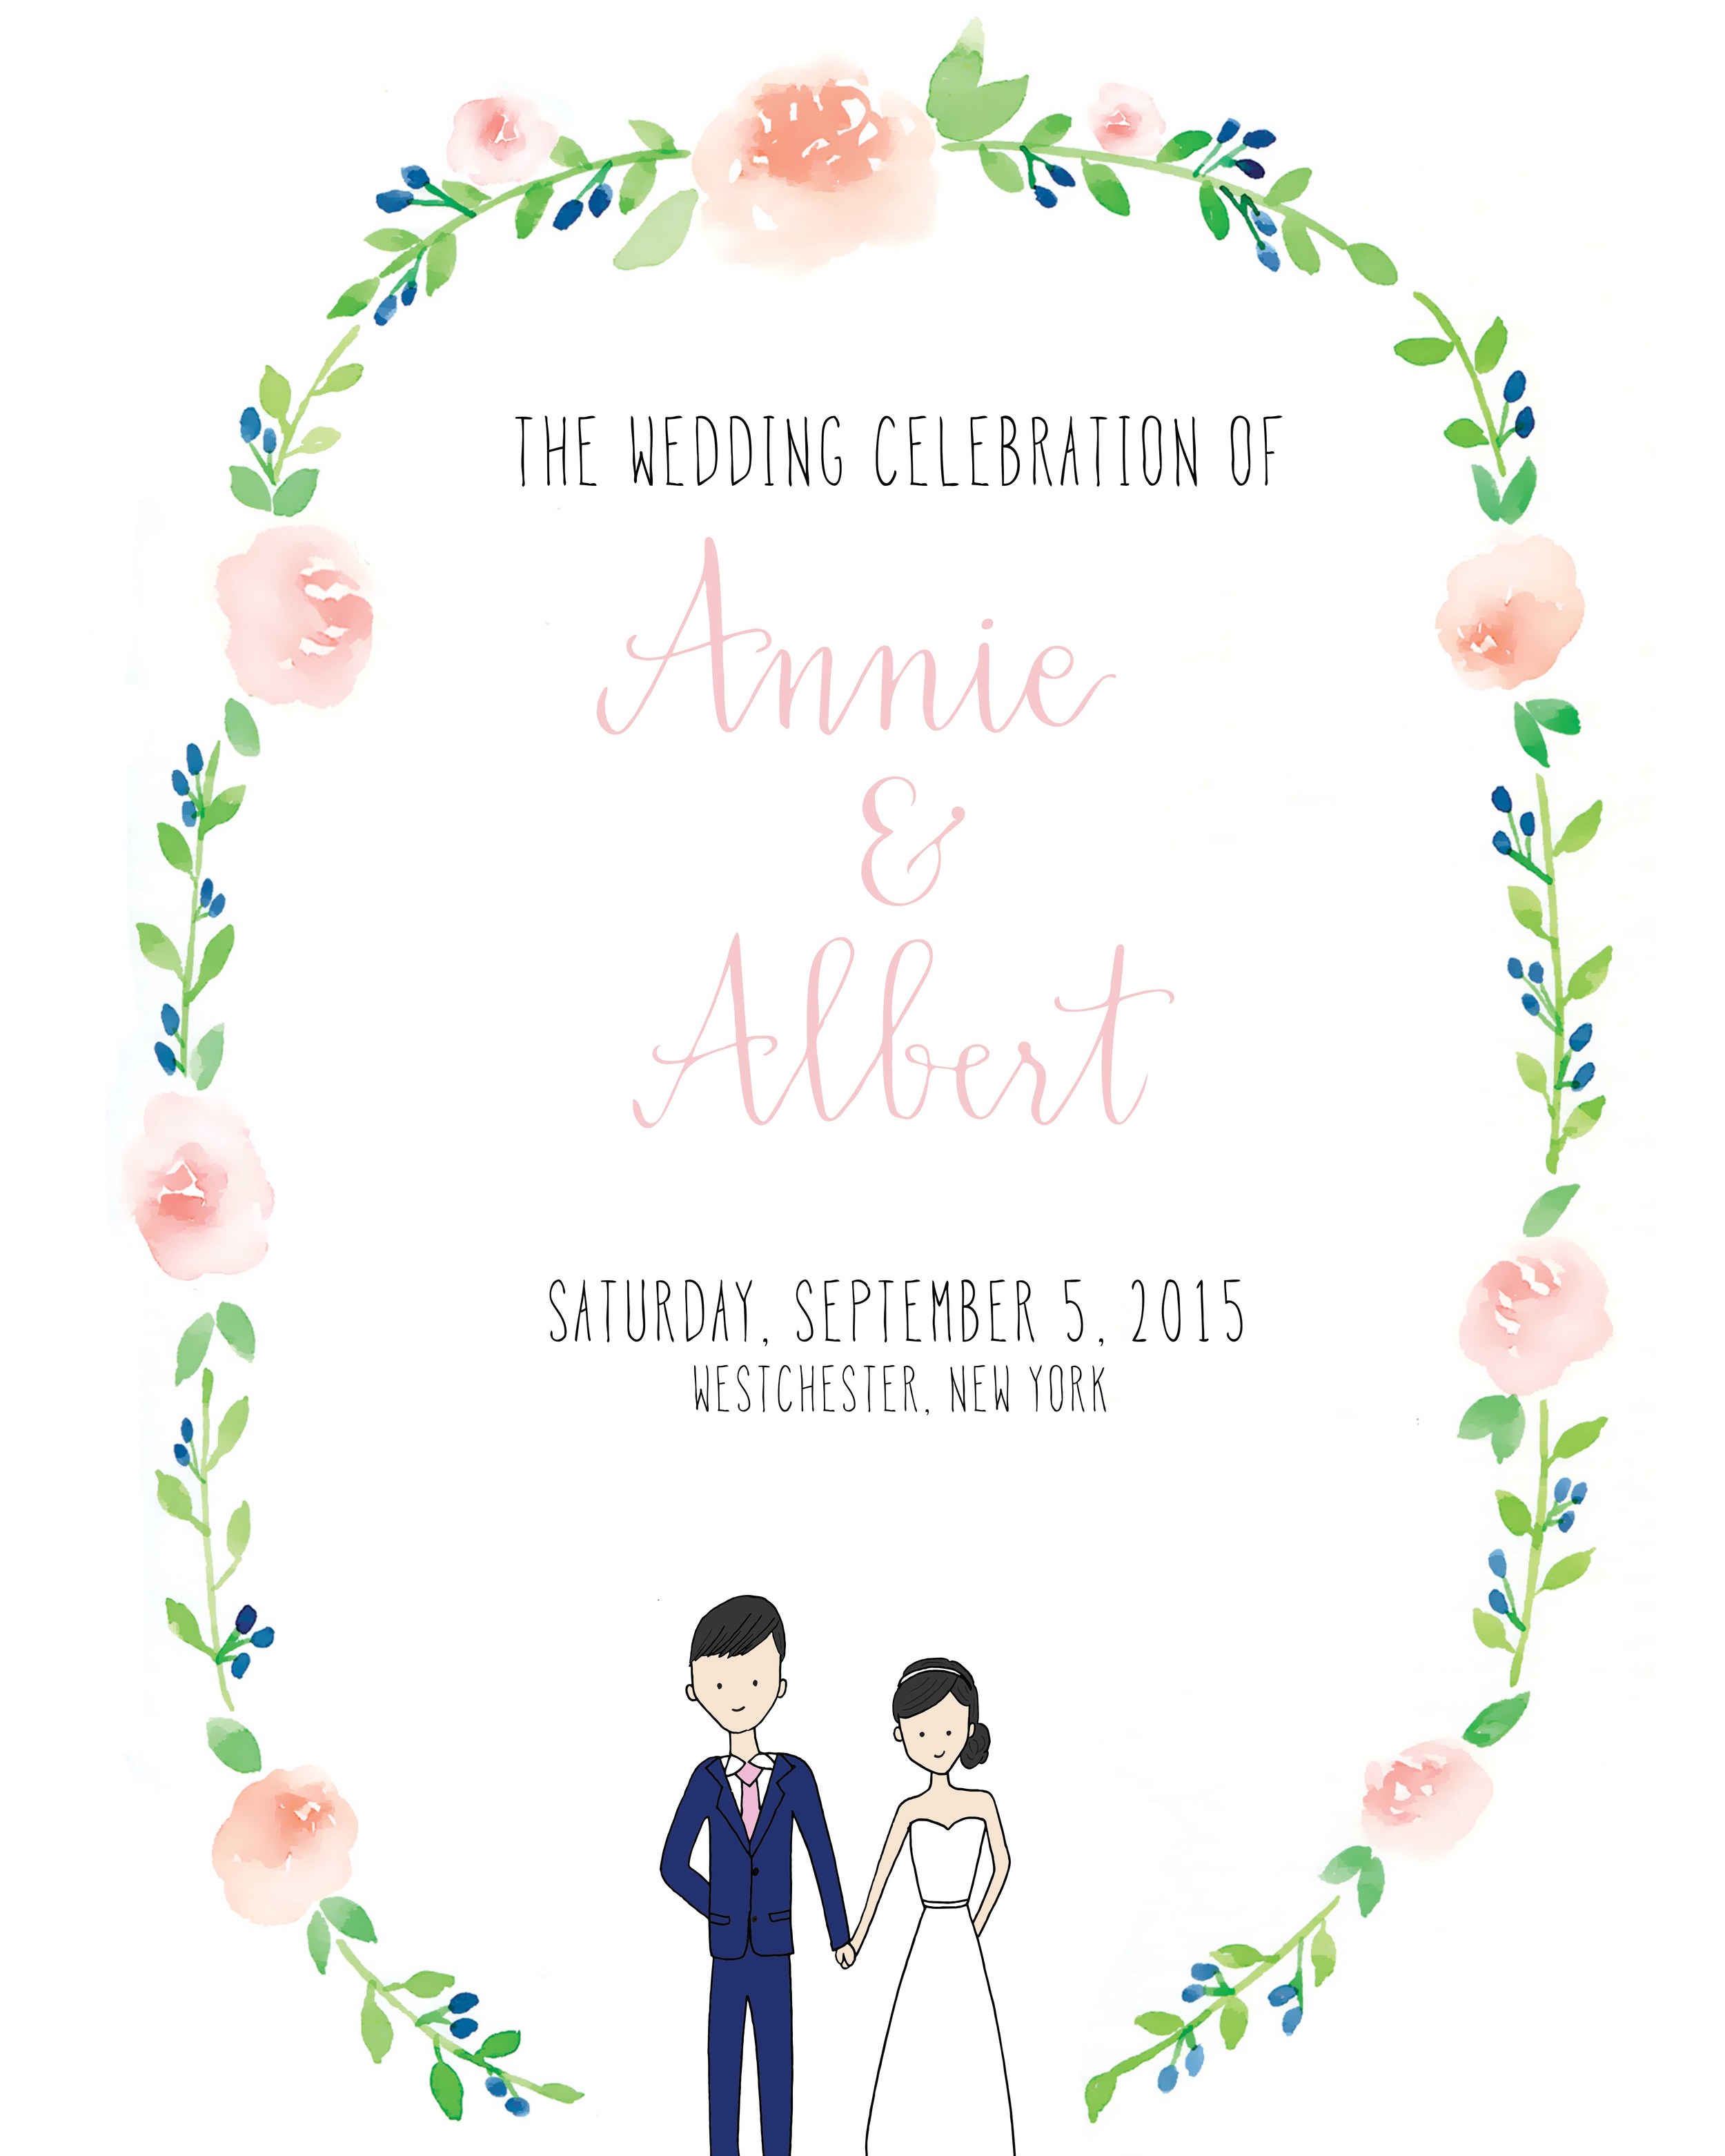 annie and albert colored with florals.jpg